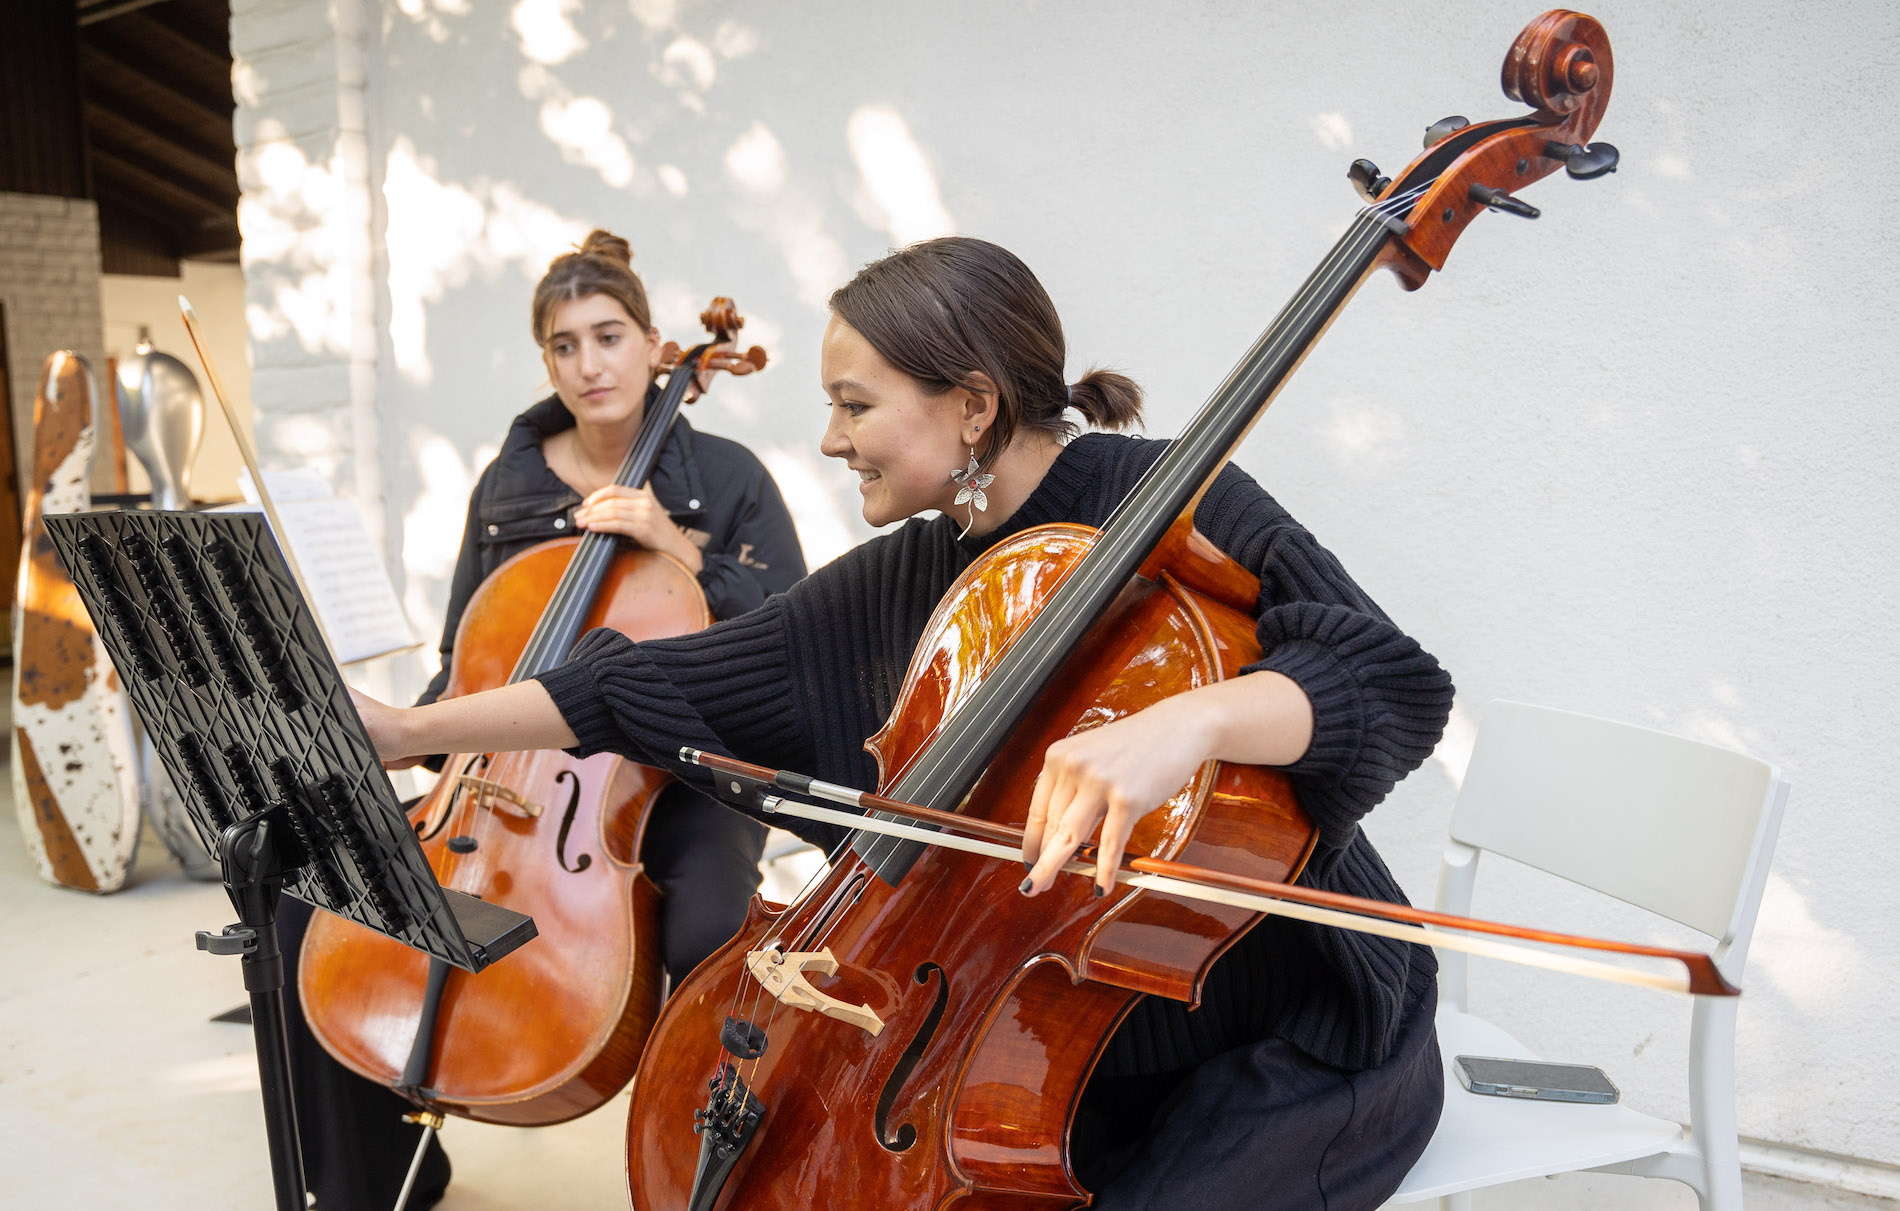 Desiree Sturrock, right, and Eden Llodra ’23 play cello at the Saint Mary’s College Museum of Art in September 2022